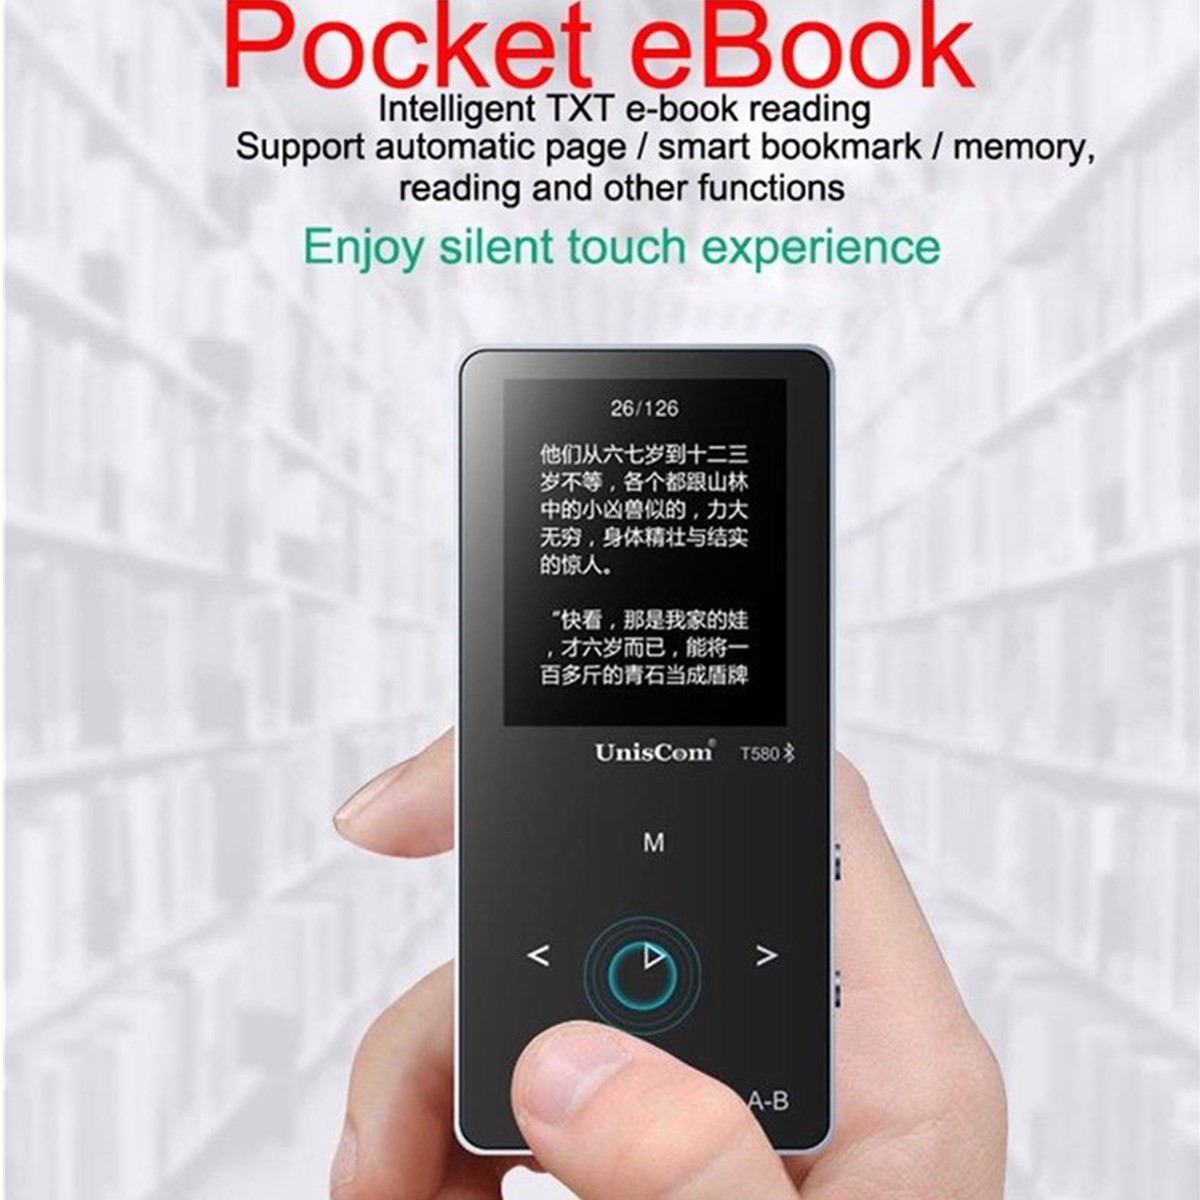 Uniscom 8G 1.8 Inch Screen bluetooth Lossless HIFI MP3 Music Player Support A-B Repeat Voice Record 14